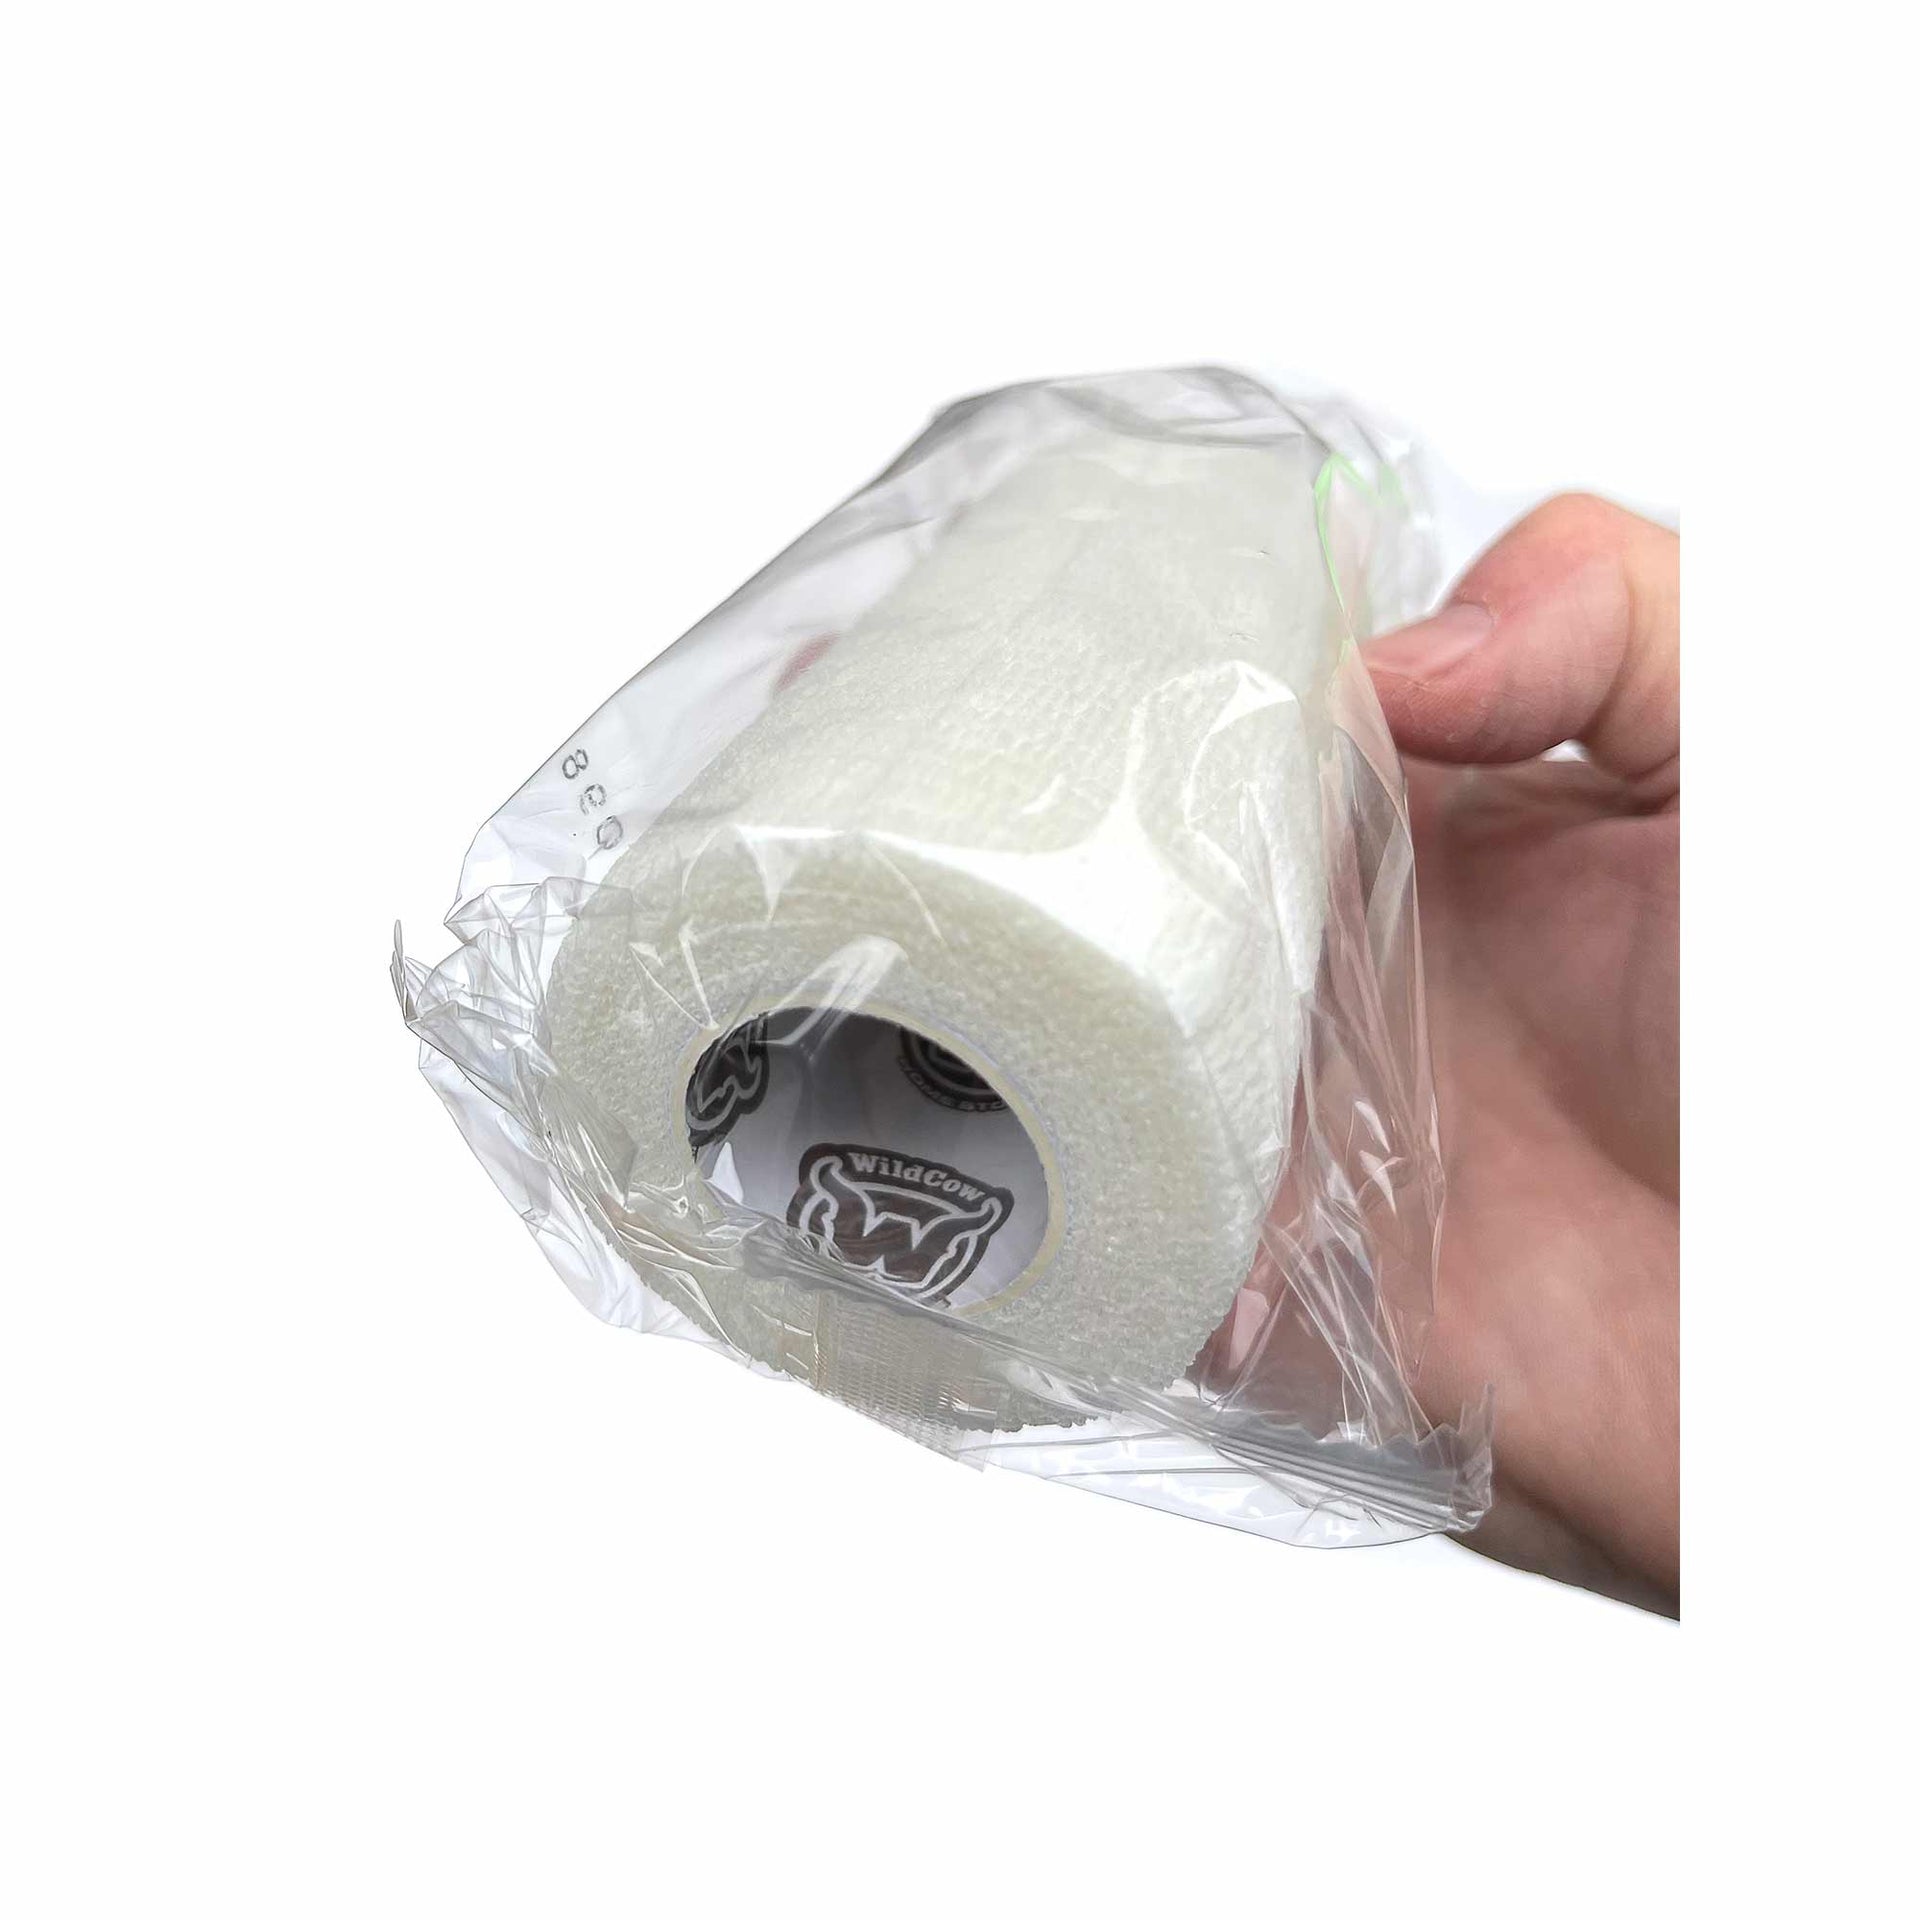 WildCow 4 Inch White Vet Wrap Roll Held in Hand